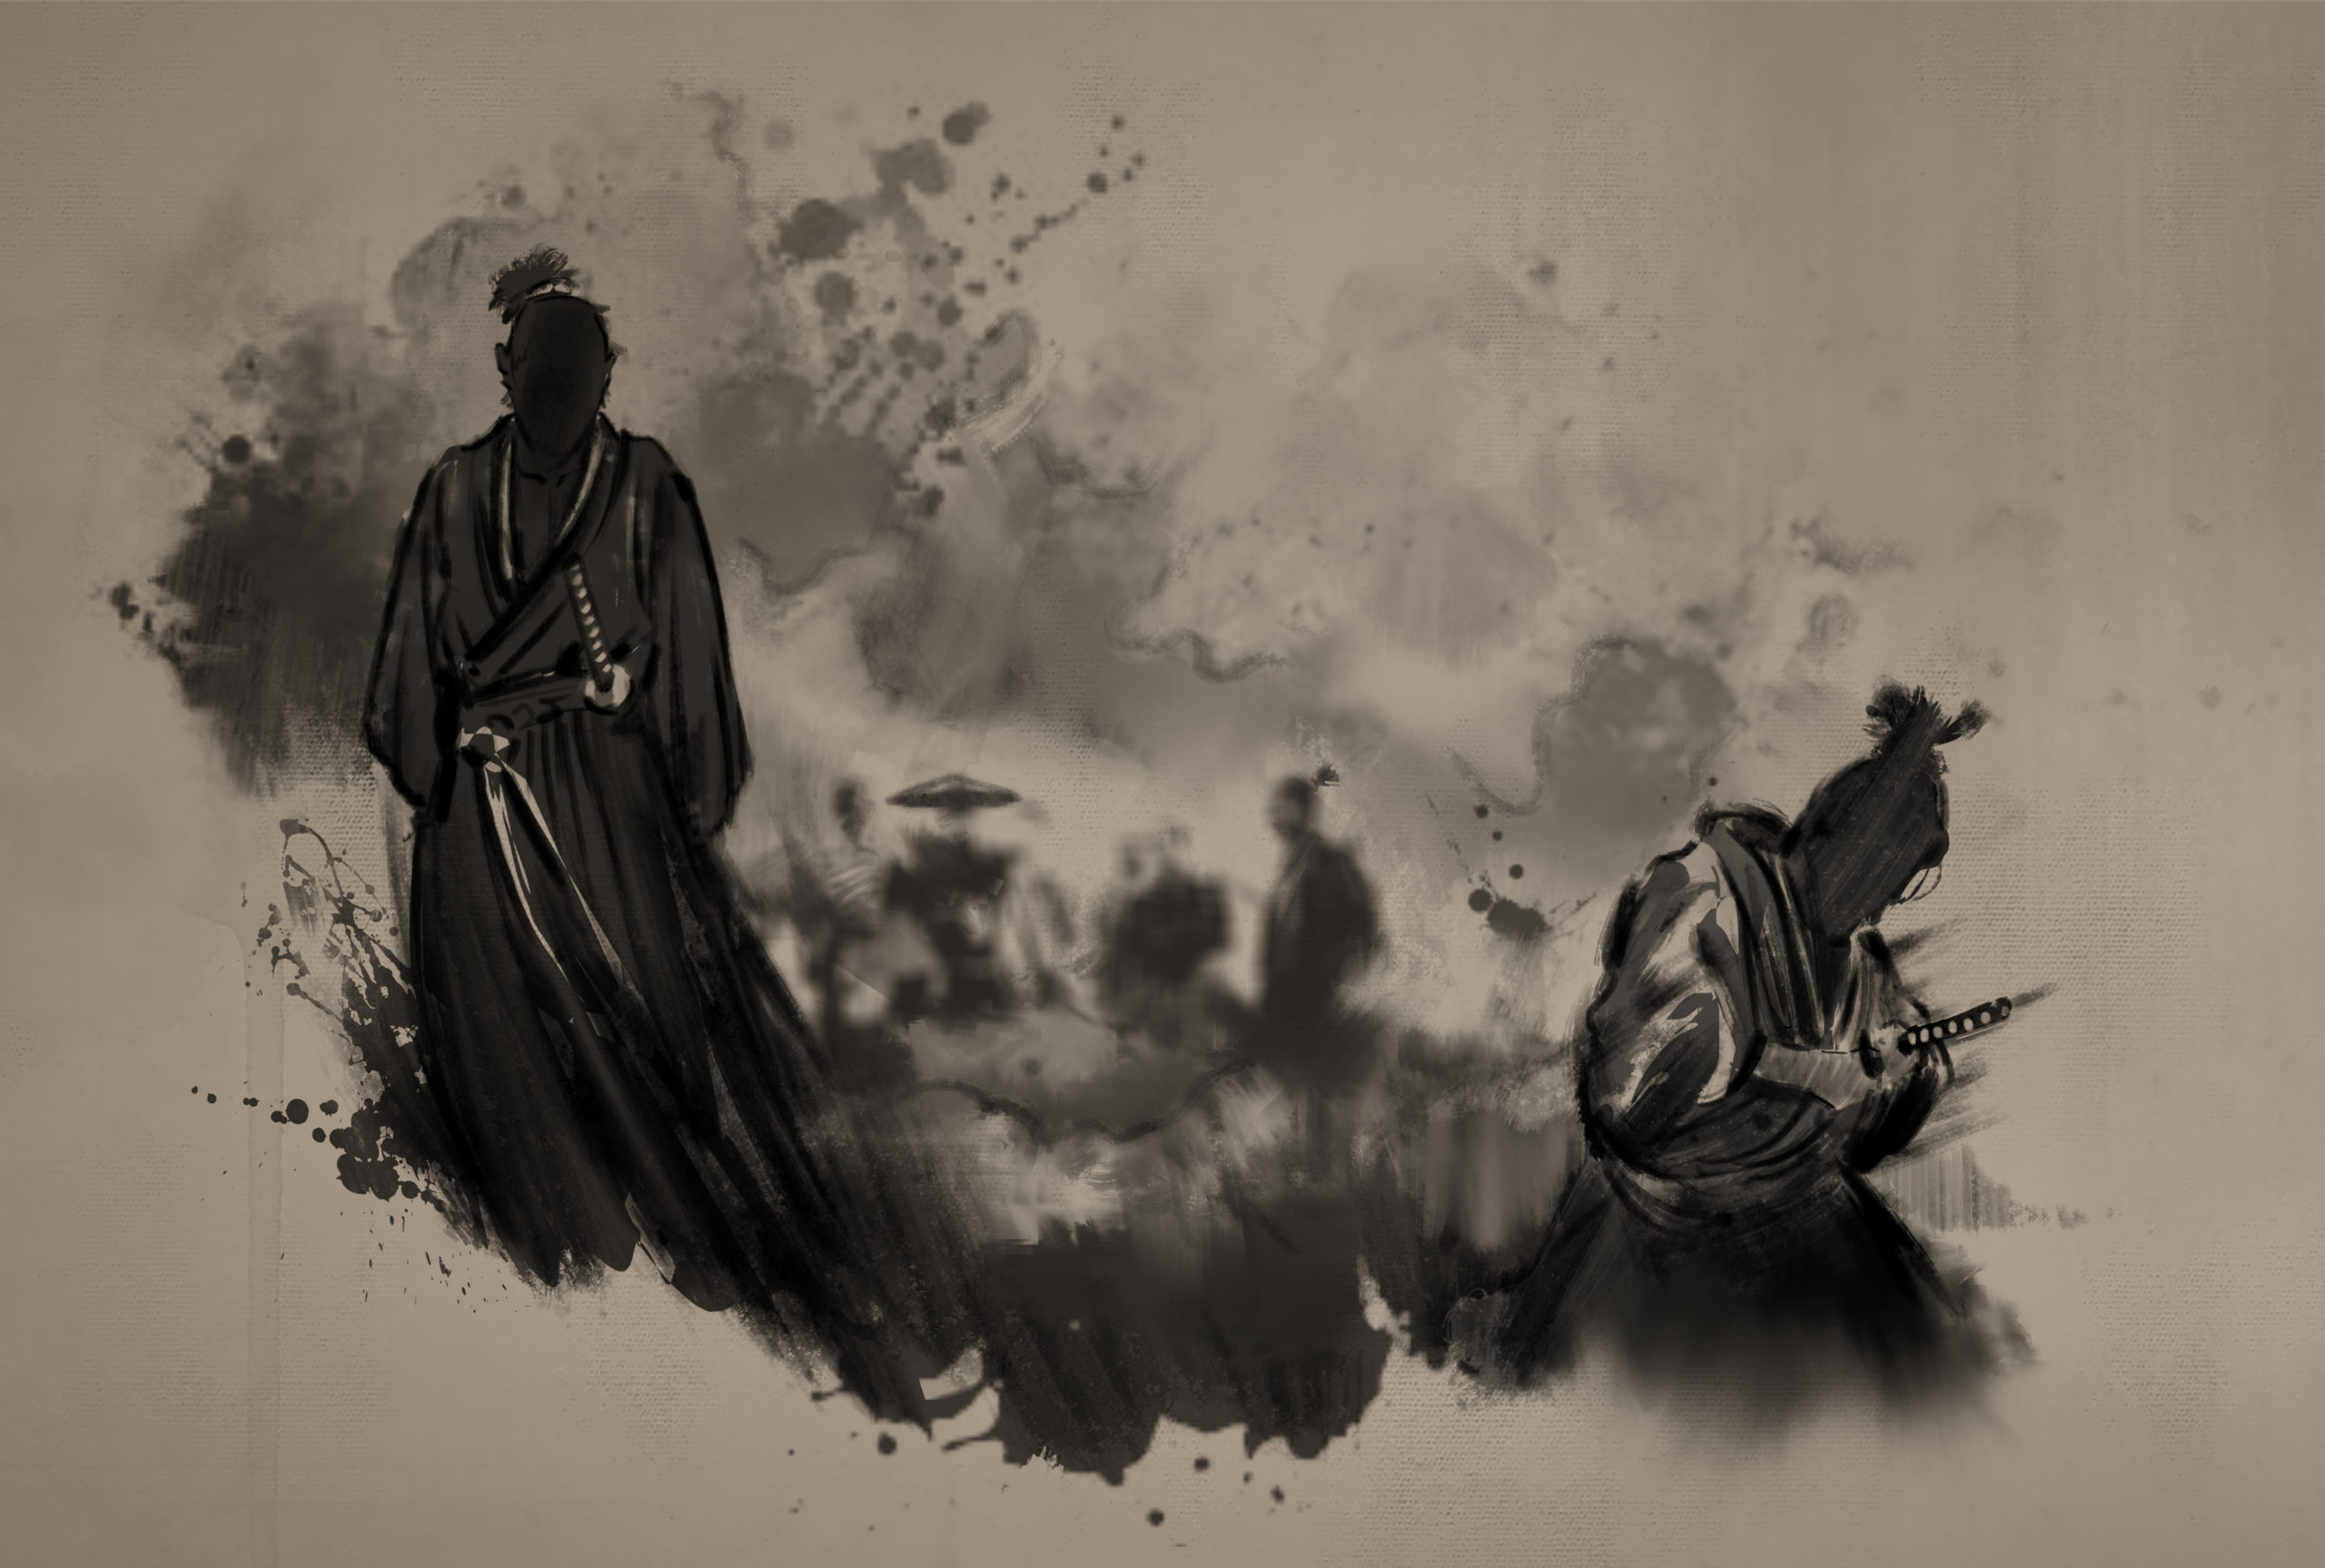 Concept artwork of two samurai in an black ink blot style. One samurai stands to the left without a face, watching as the other samurai on the right commits seppuku while kneeling.